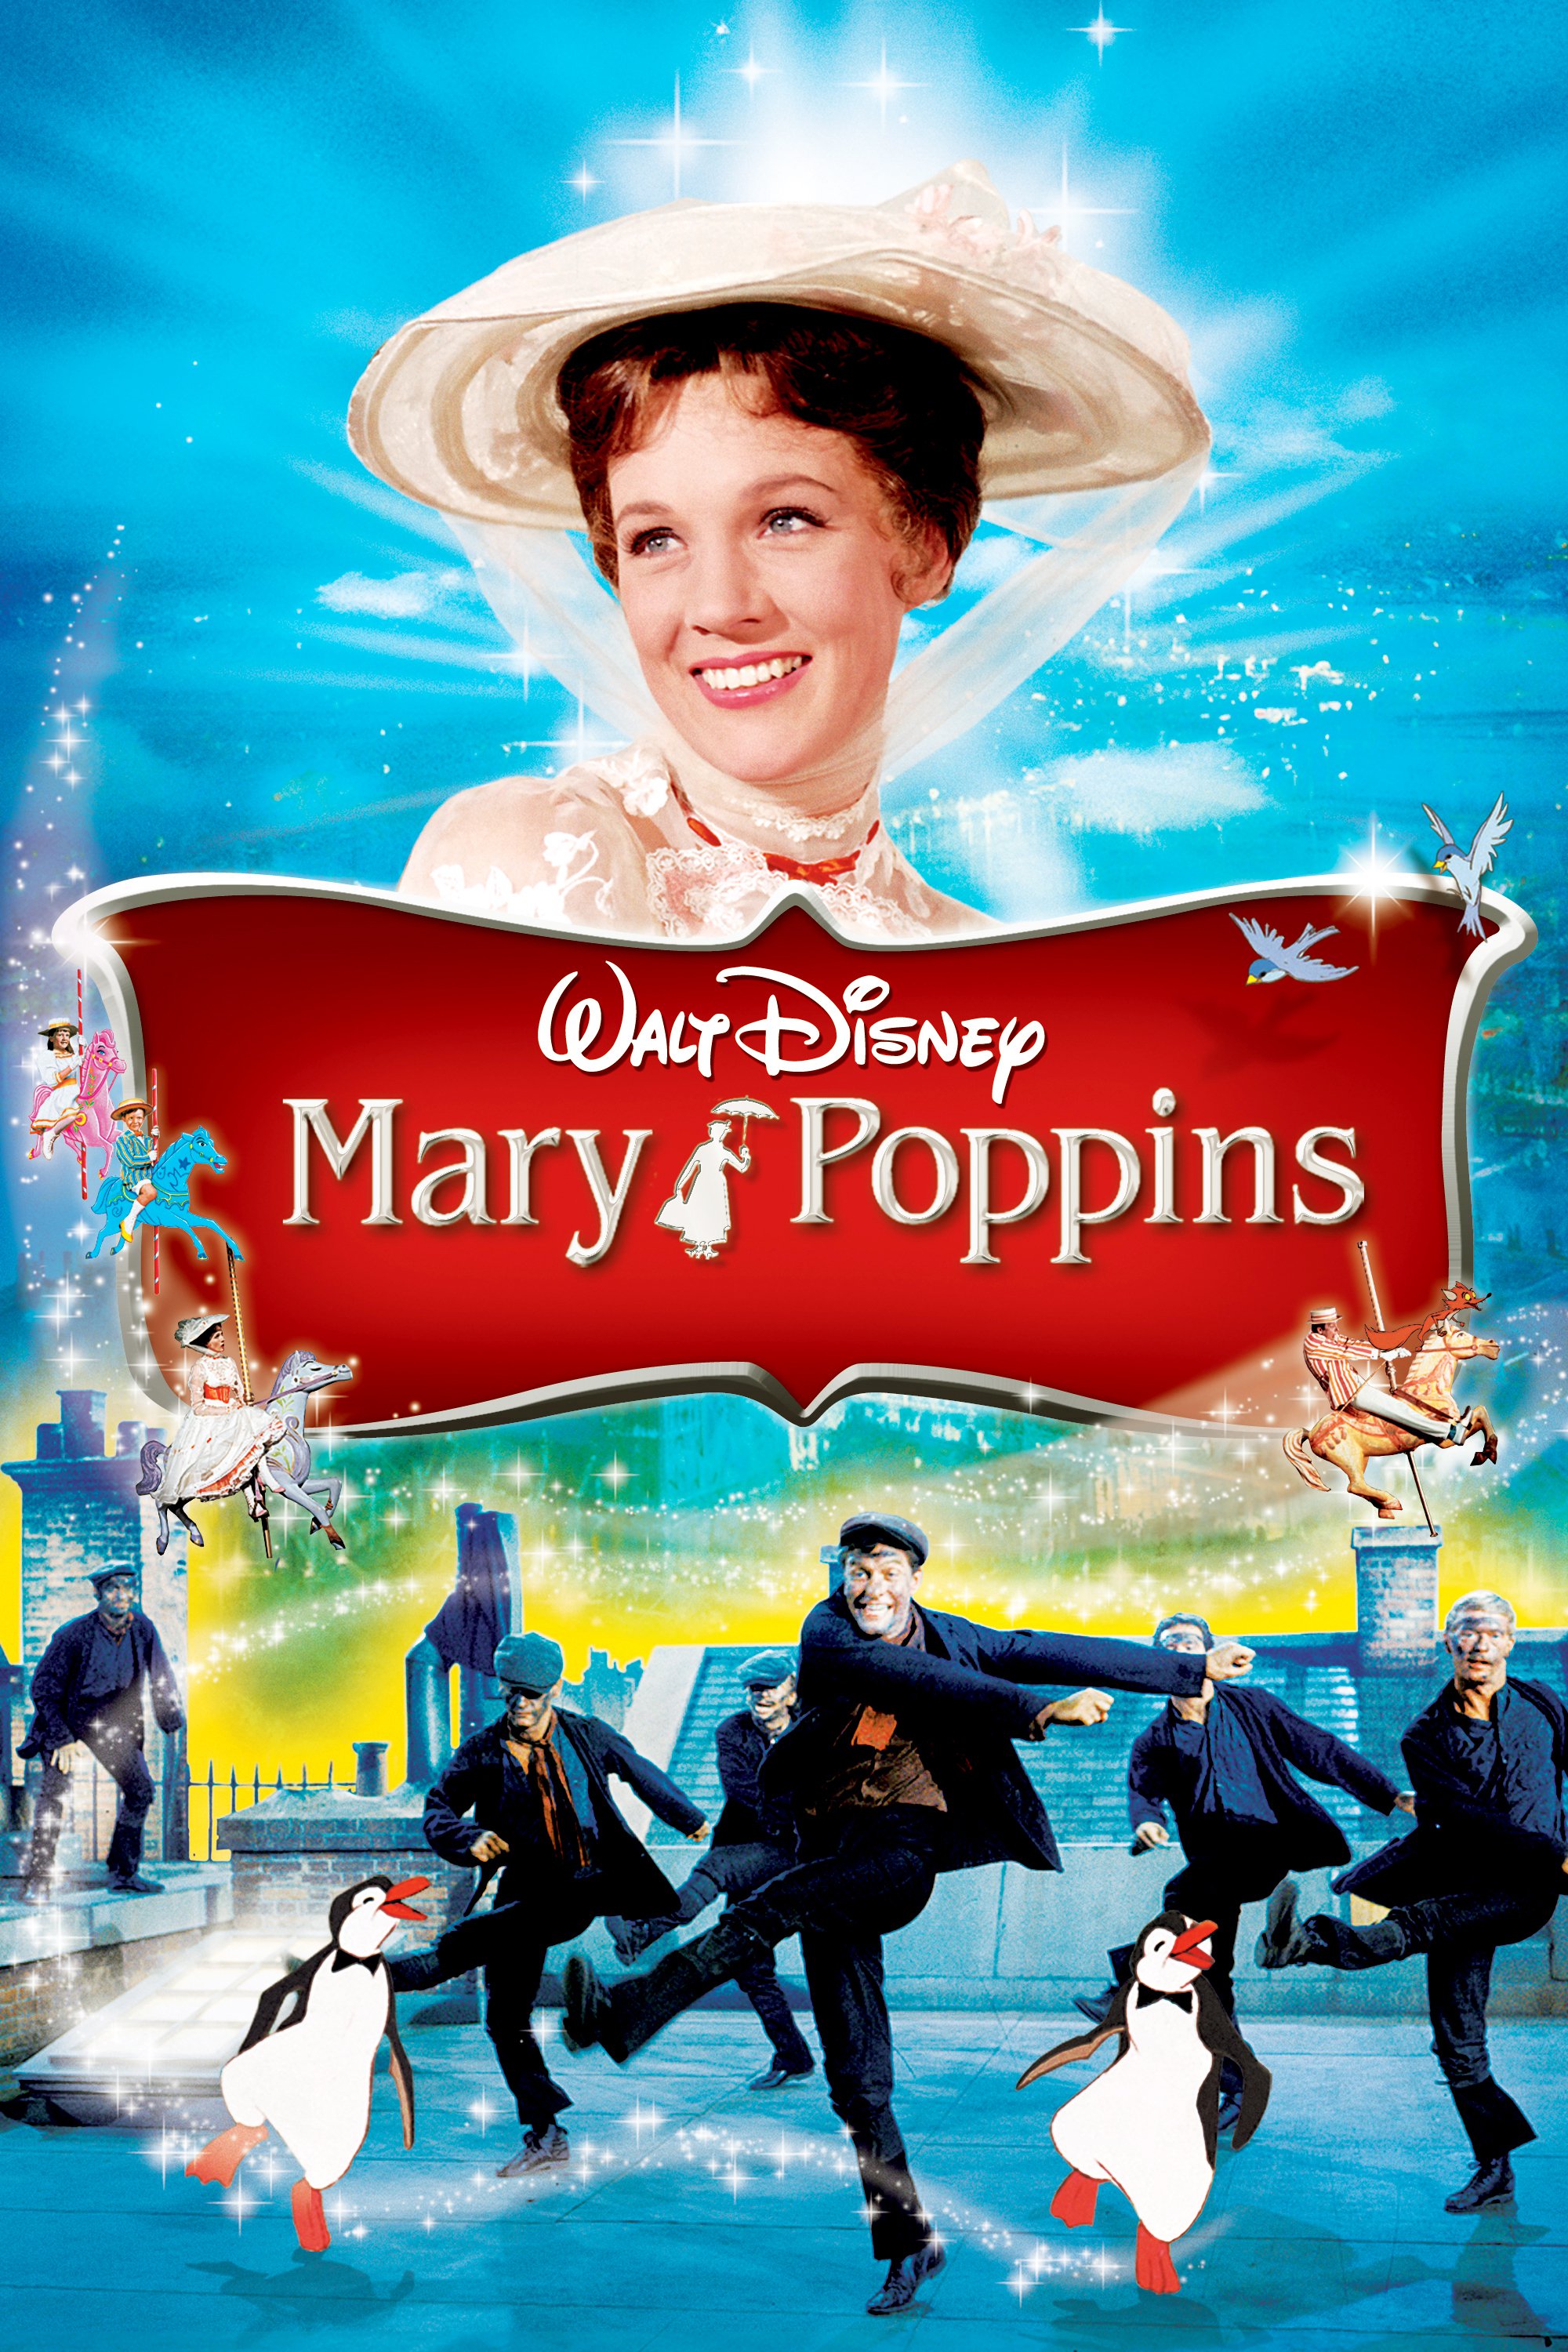 Cover art for the film Mary Poppins